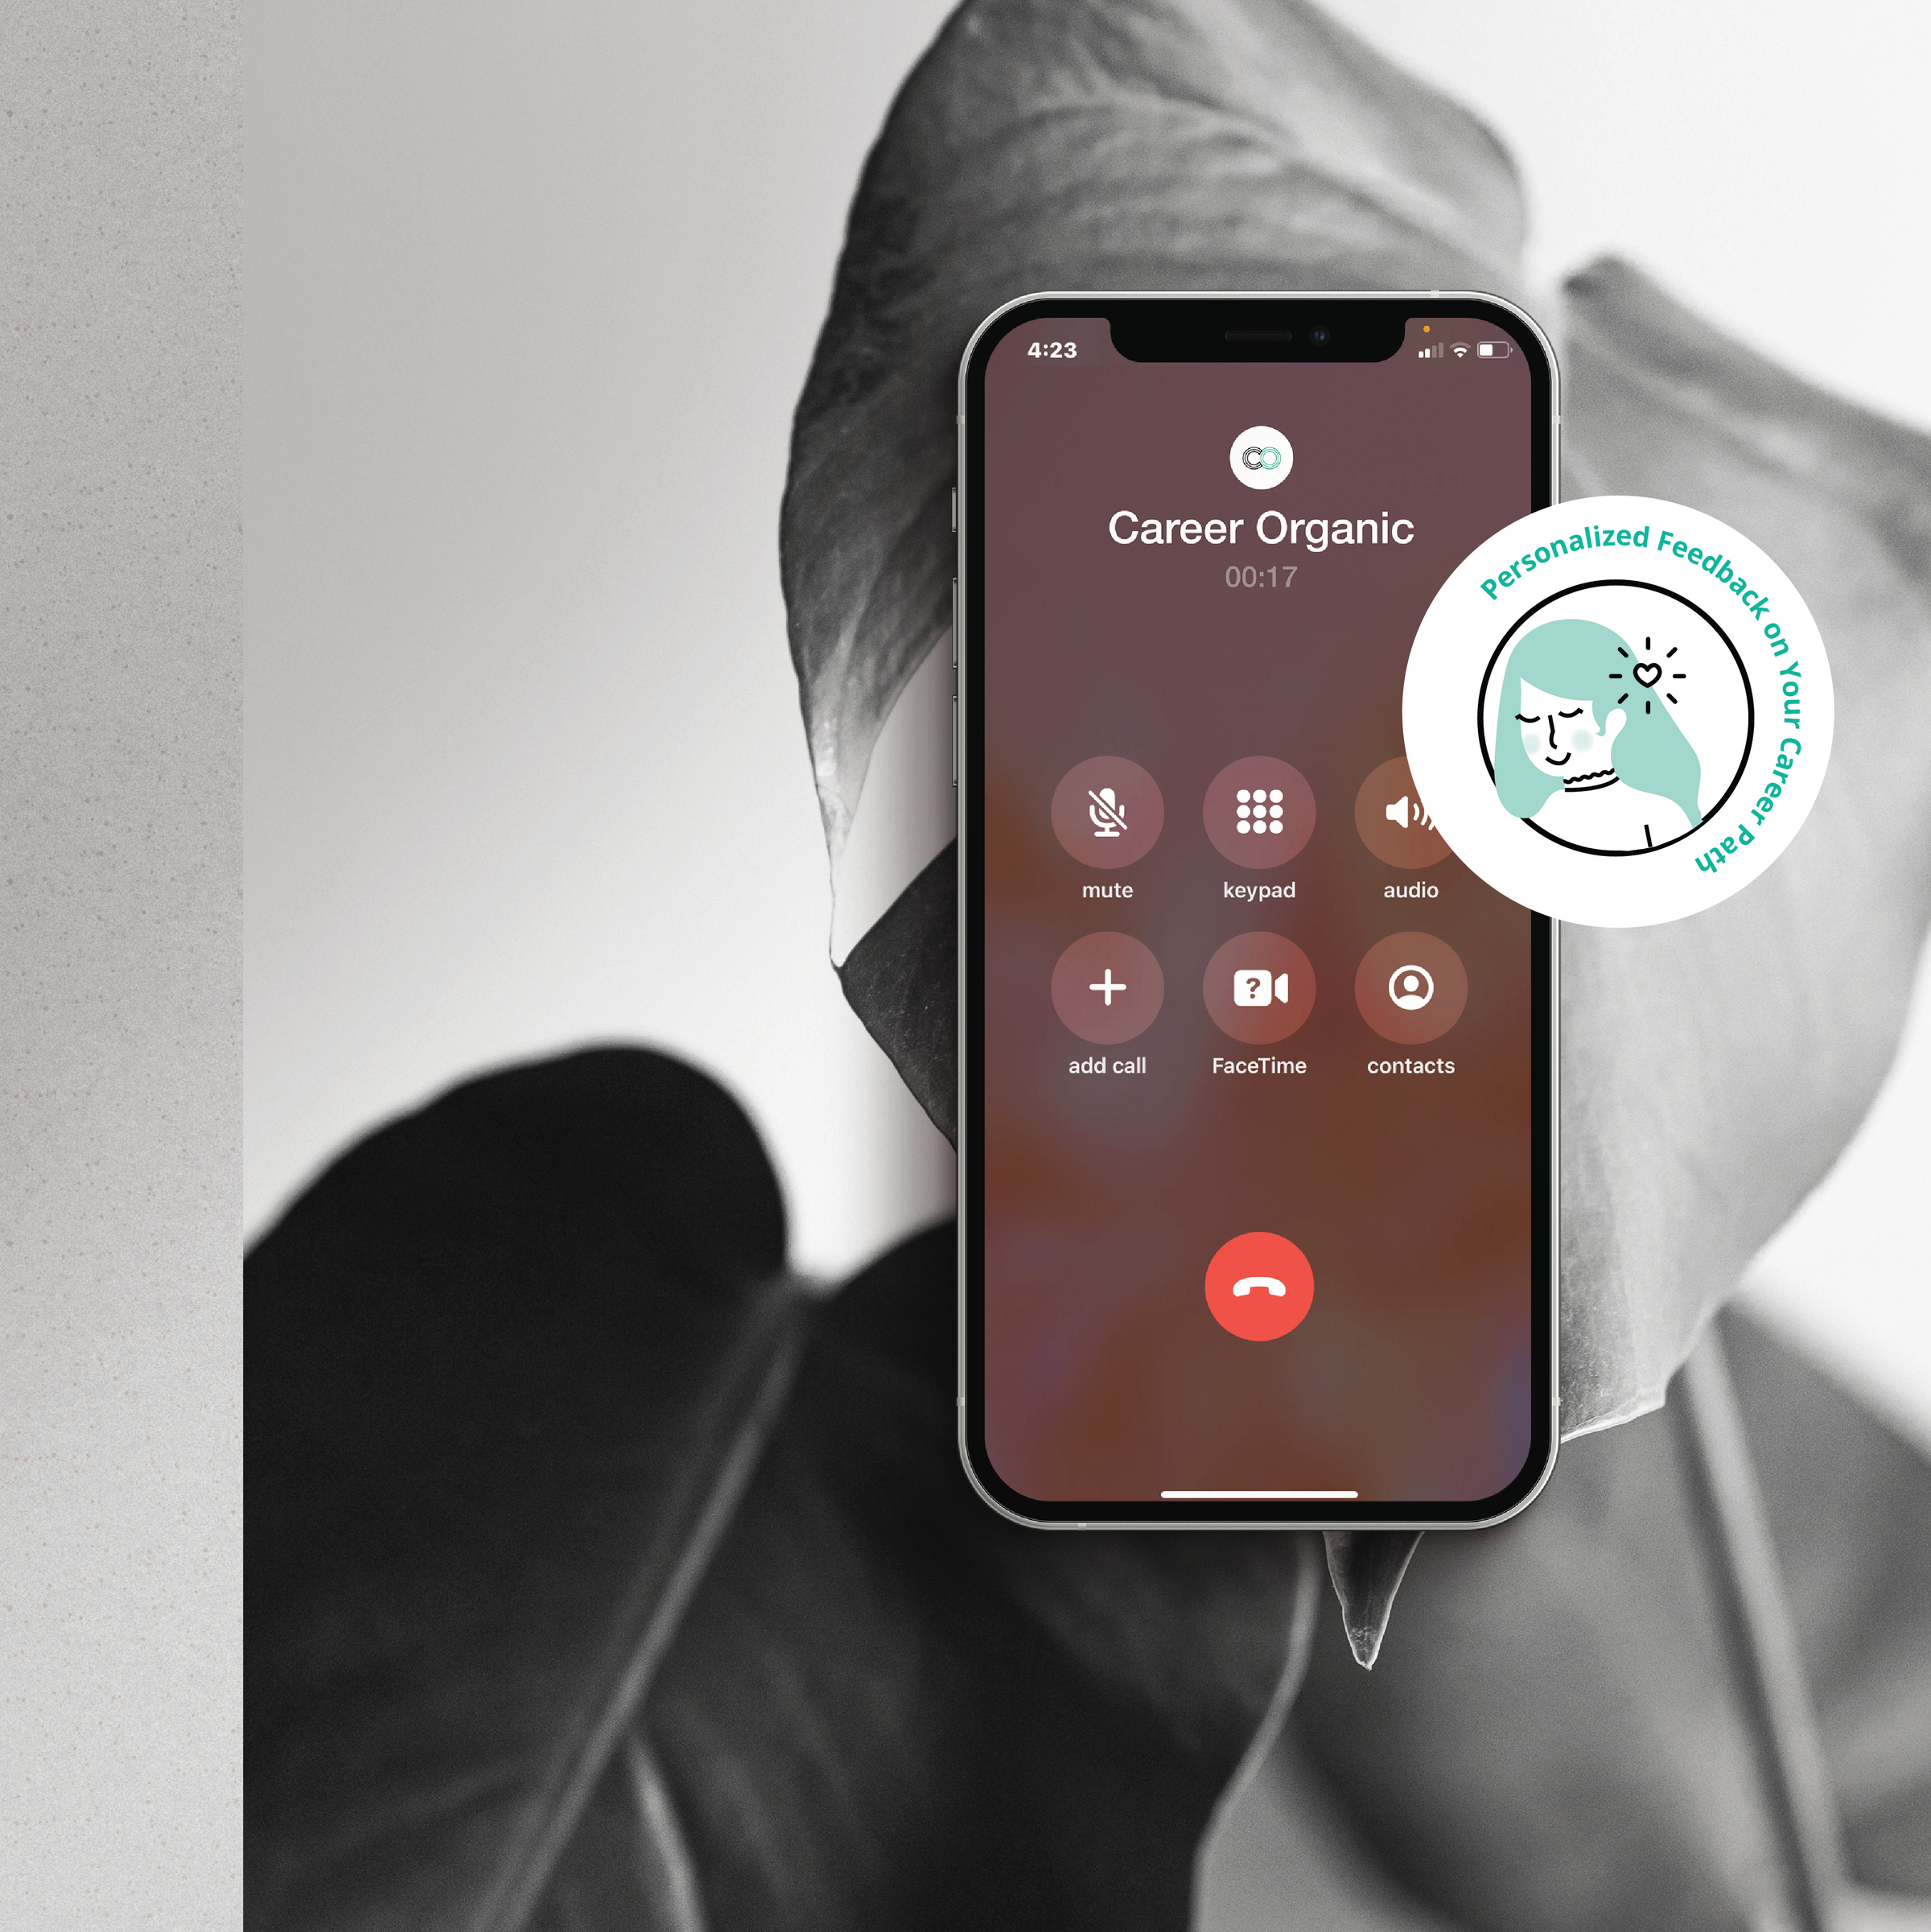 iphone with Career Organic Incoming Call displayed + simple icon of career coach